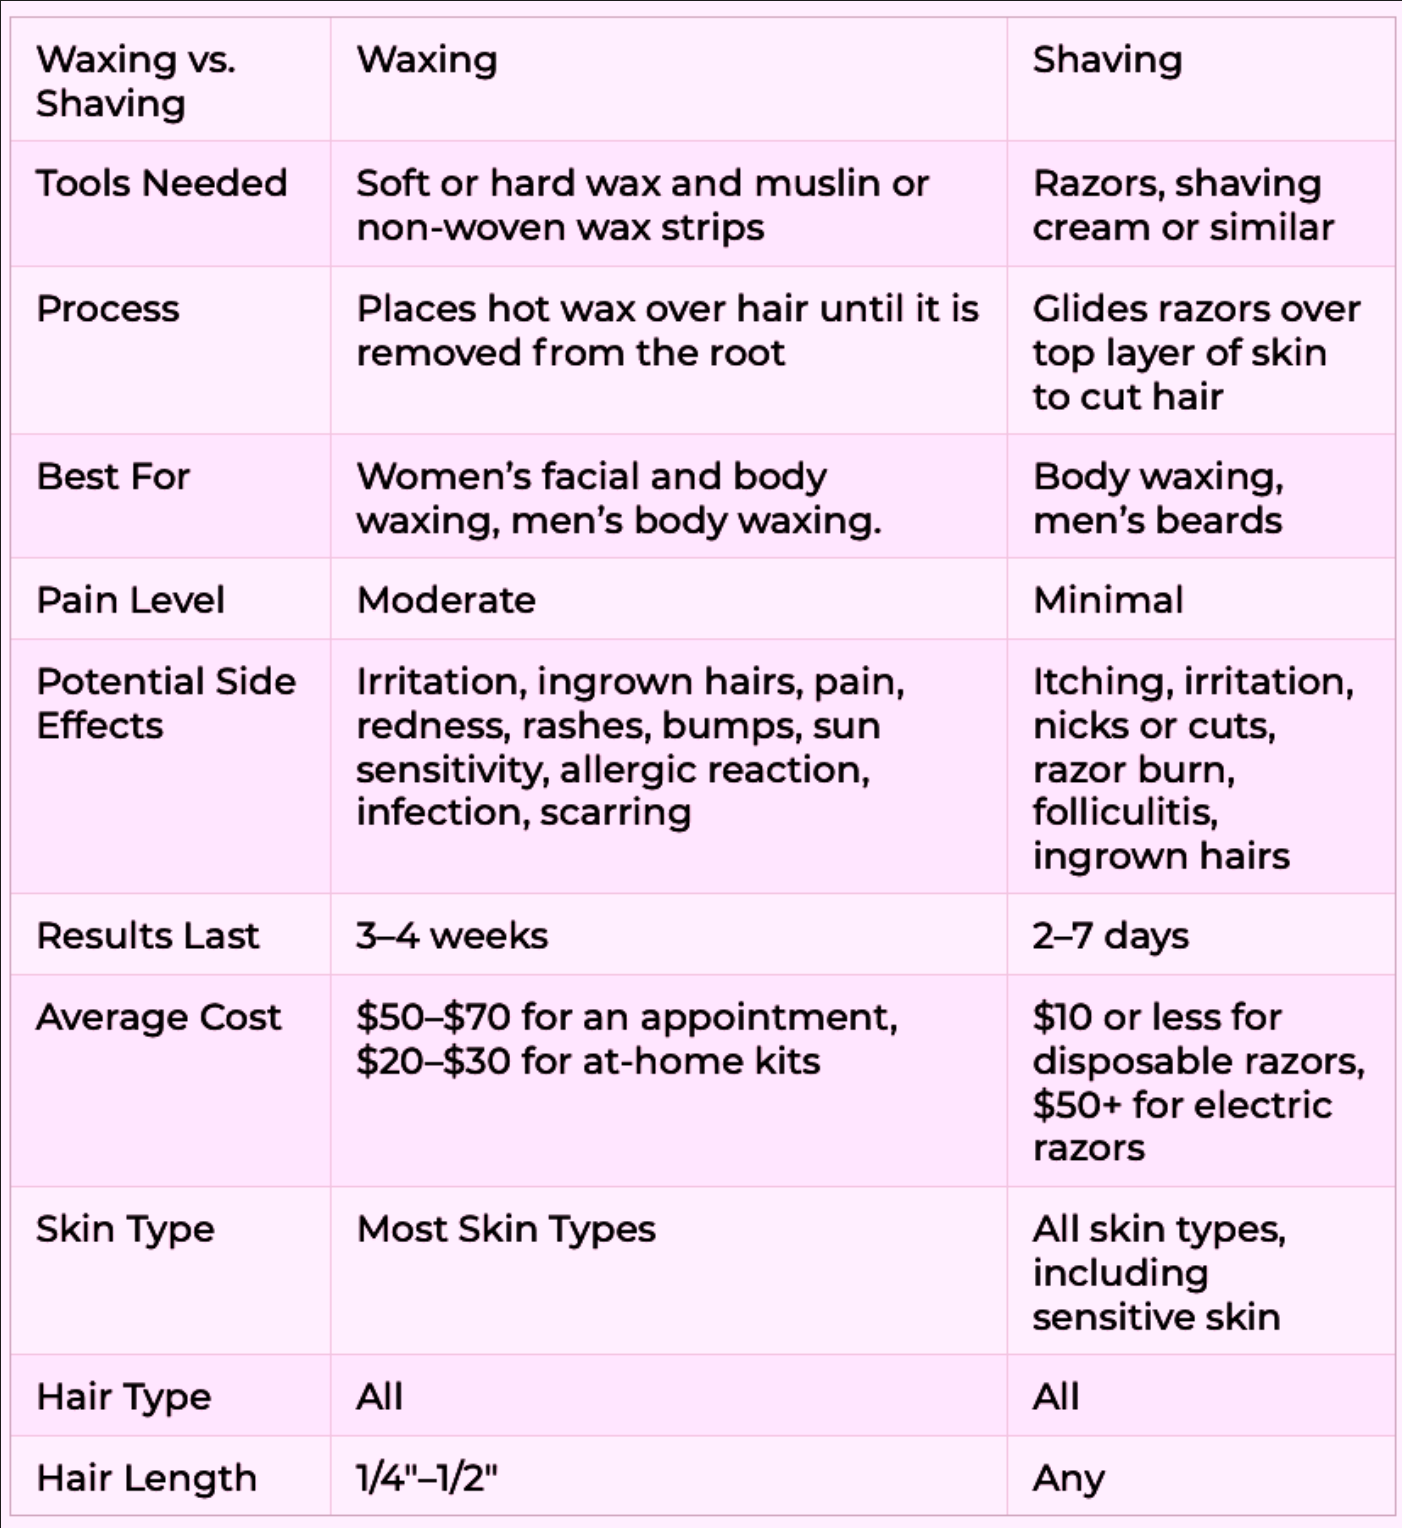 Comparing Waxing and Shaving